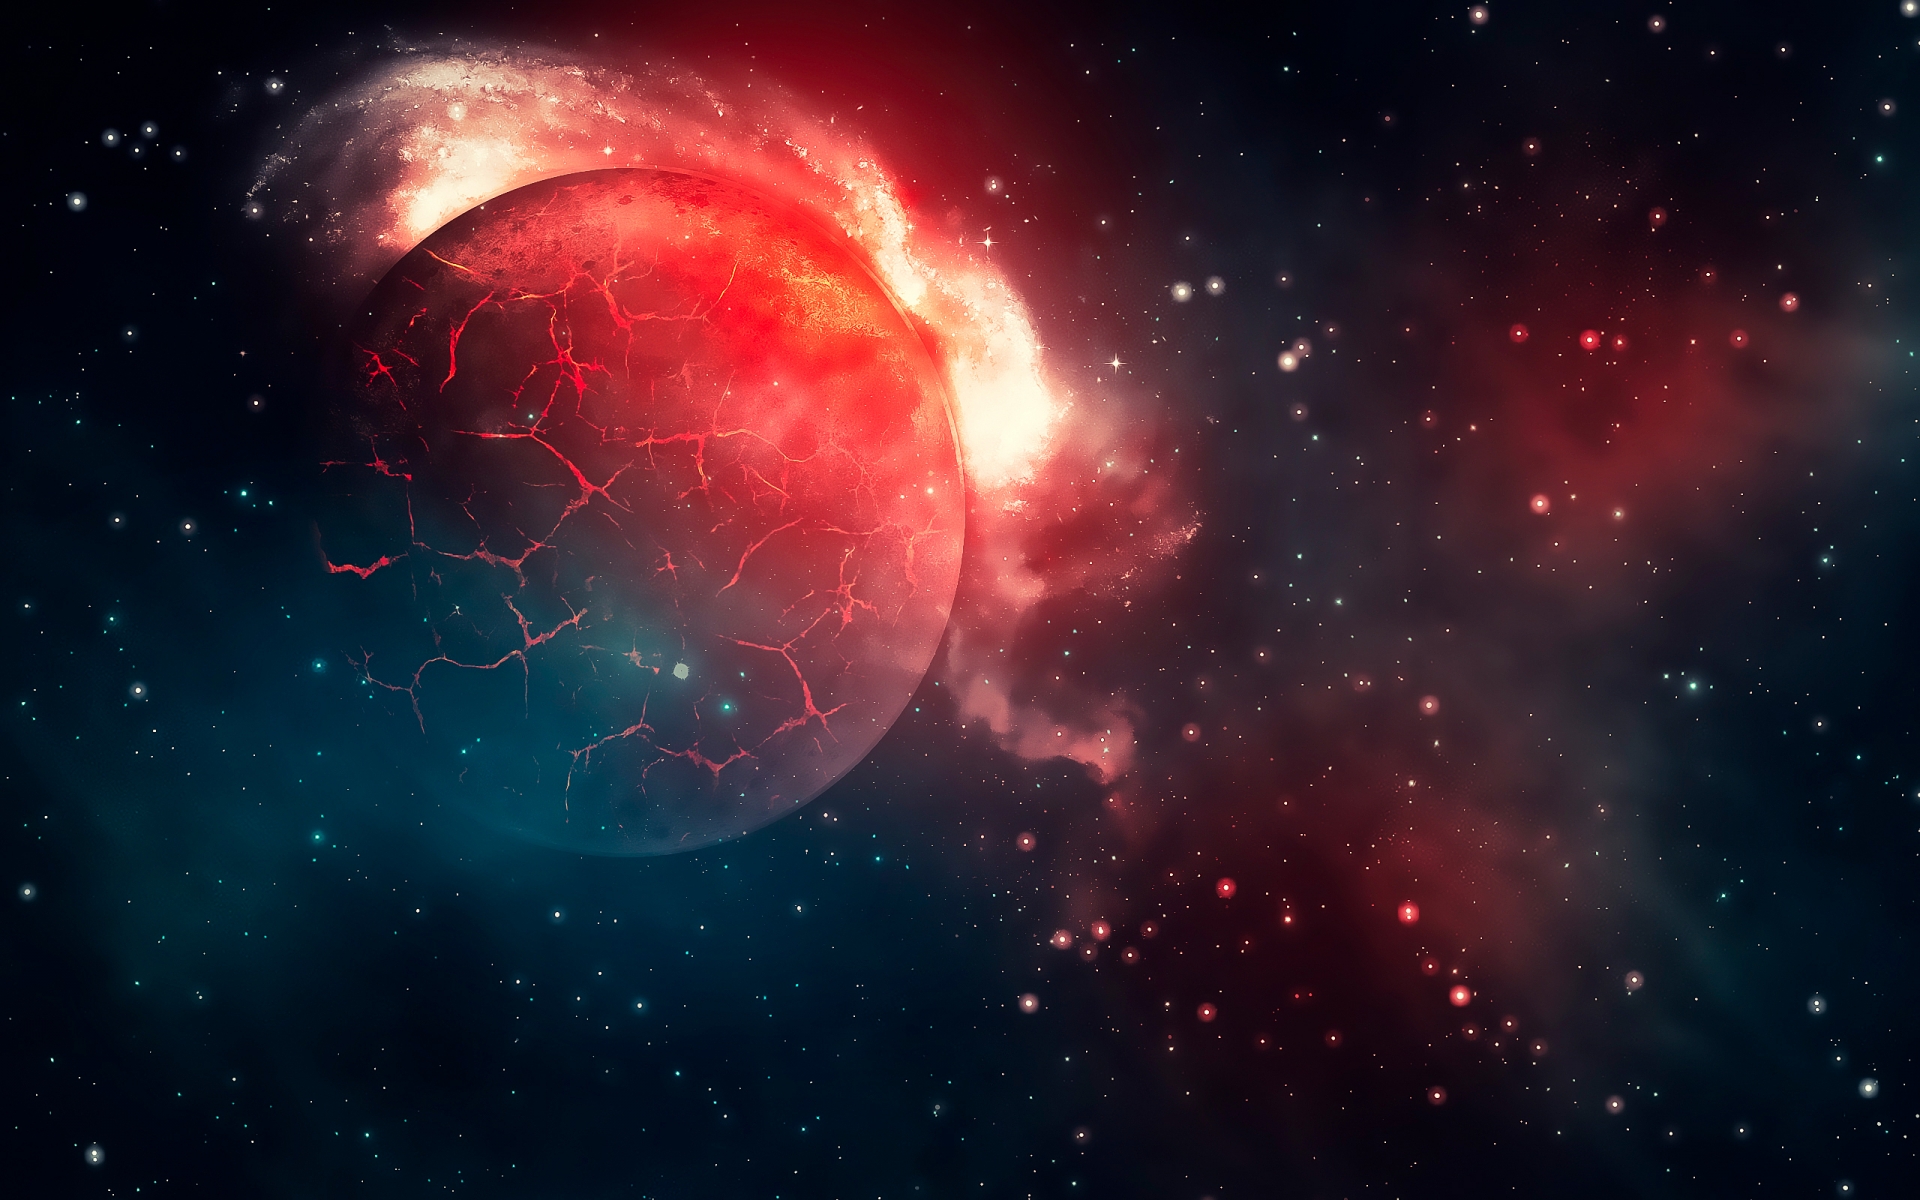 Space World Disaster for 1920 x 1200 widescreen resolution